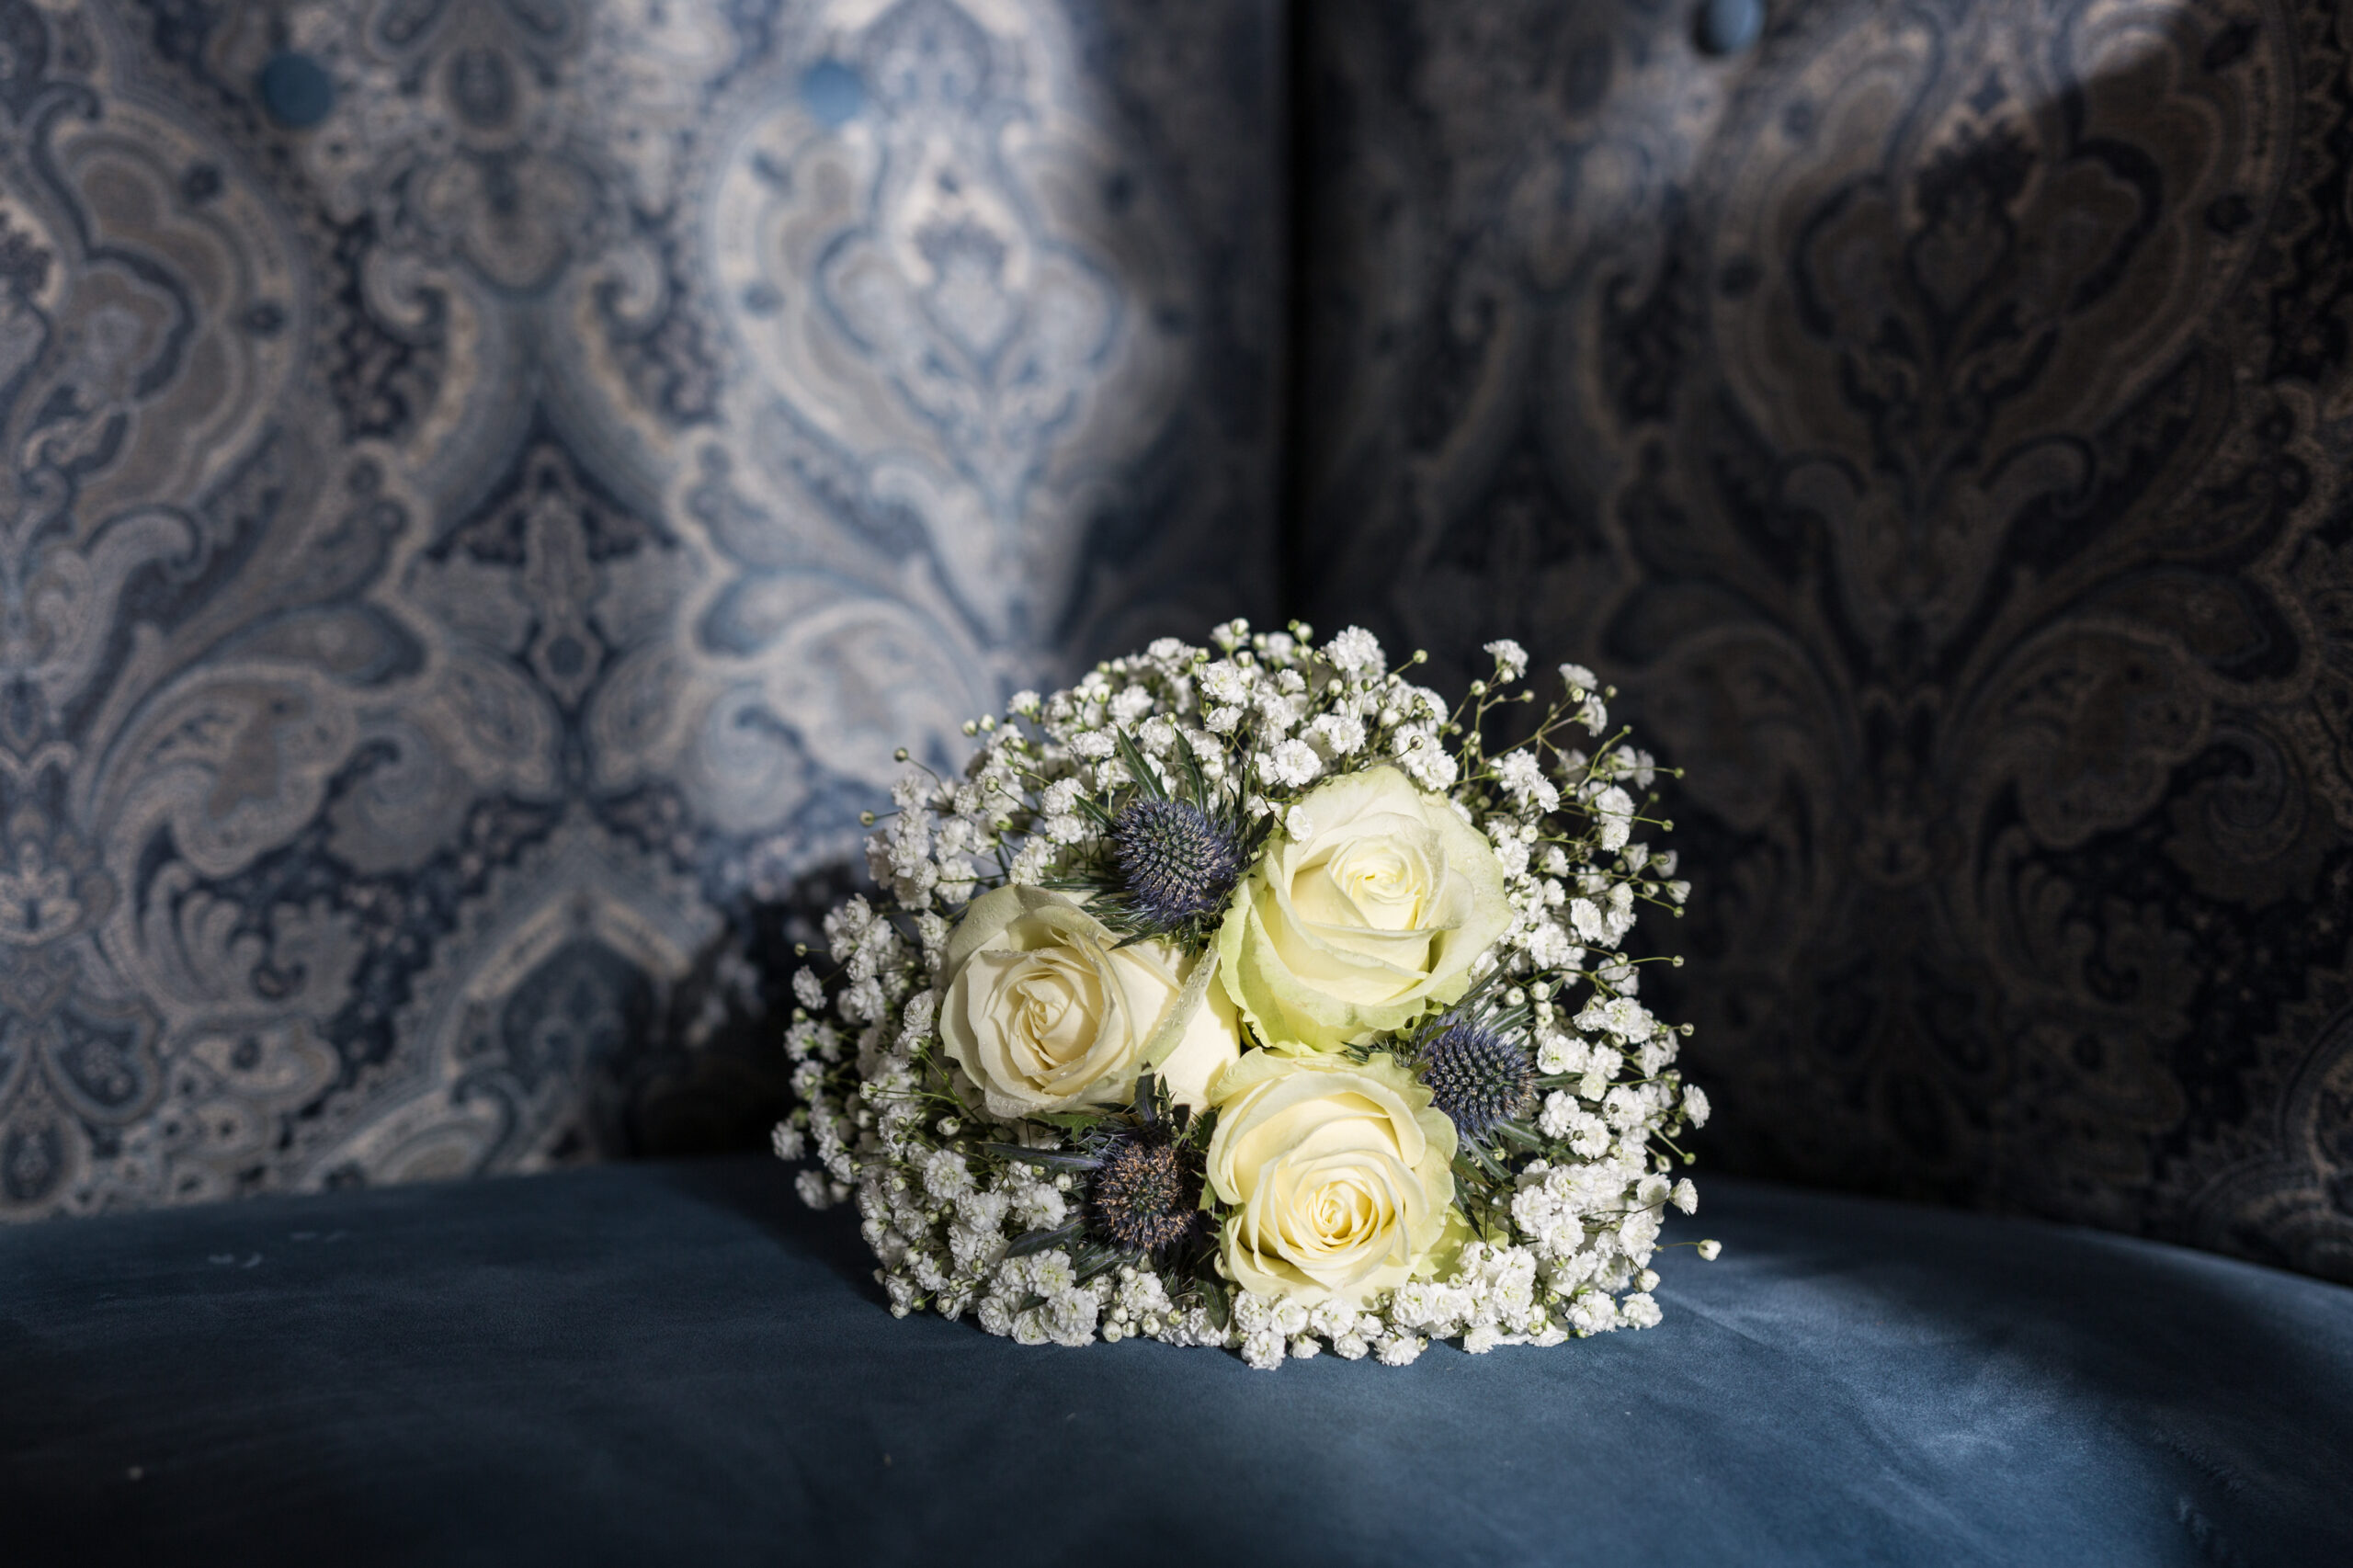 Bridal bouquet at Clevedon Hall